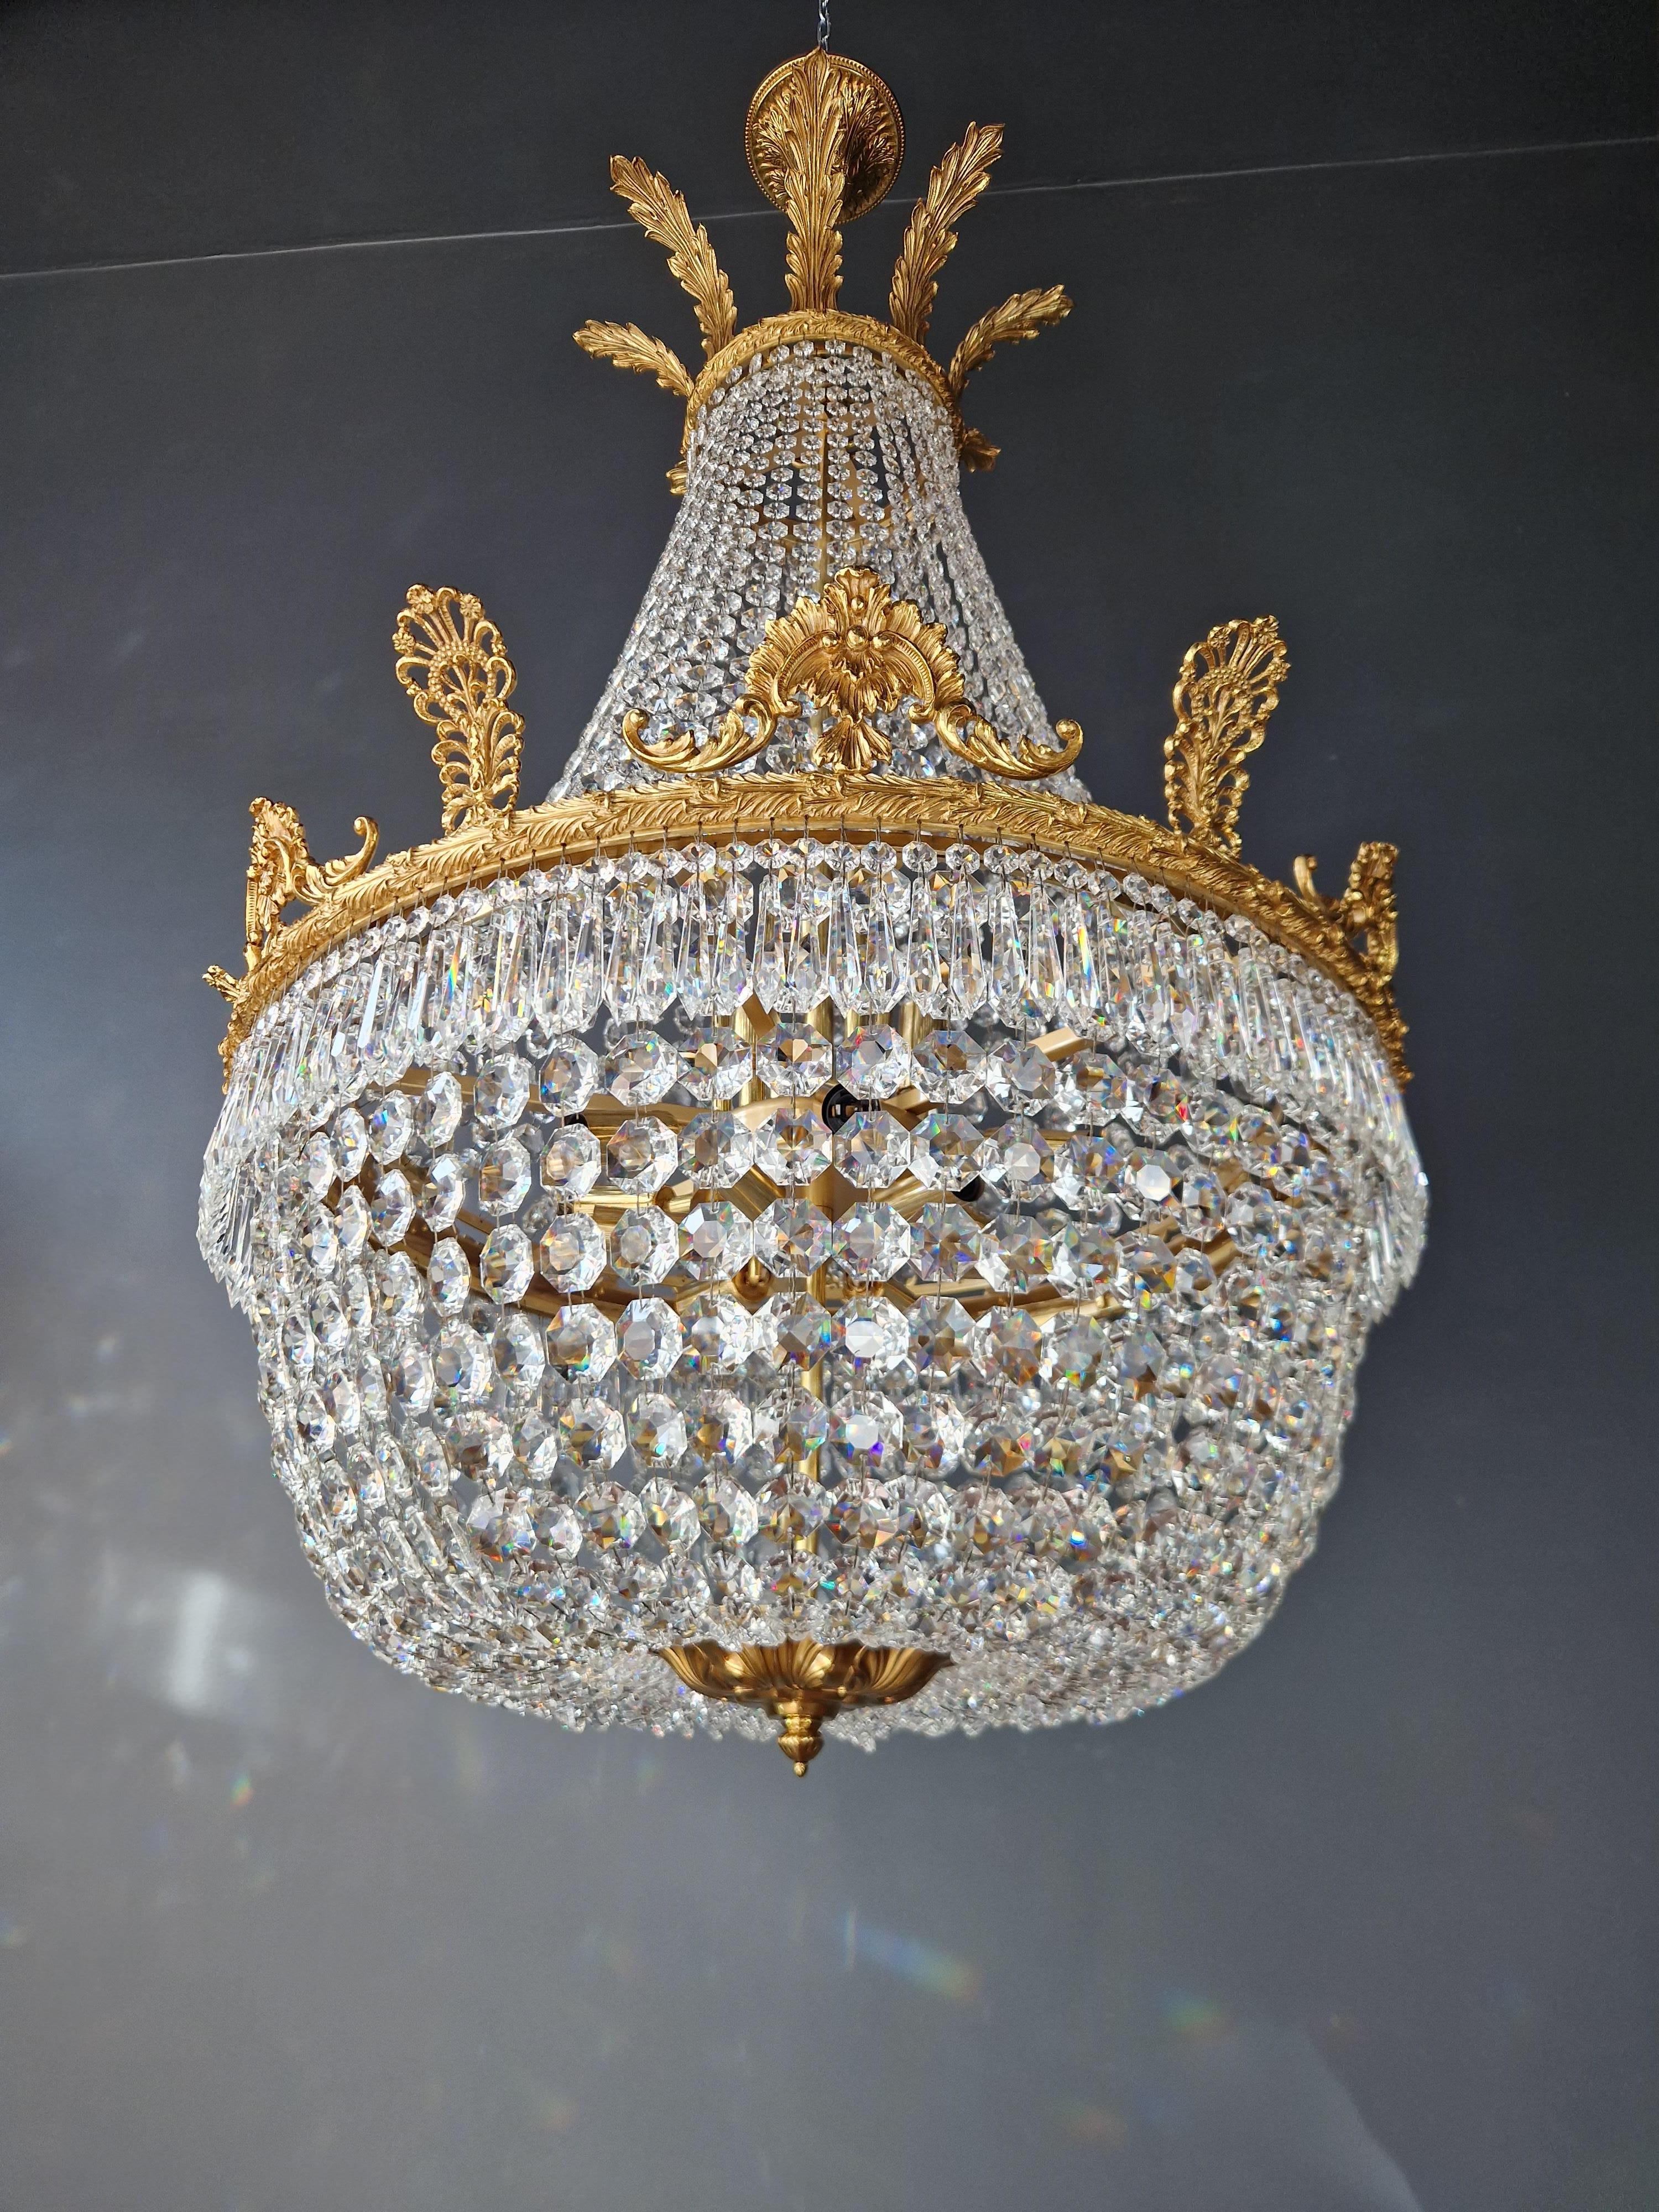 Brass Basket Empire Sac a Pearl Chandelier Crystal Lustre Lamp Antique Gold For Sale 2